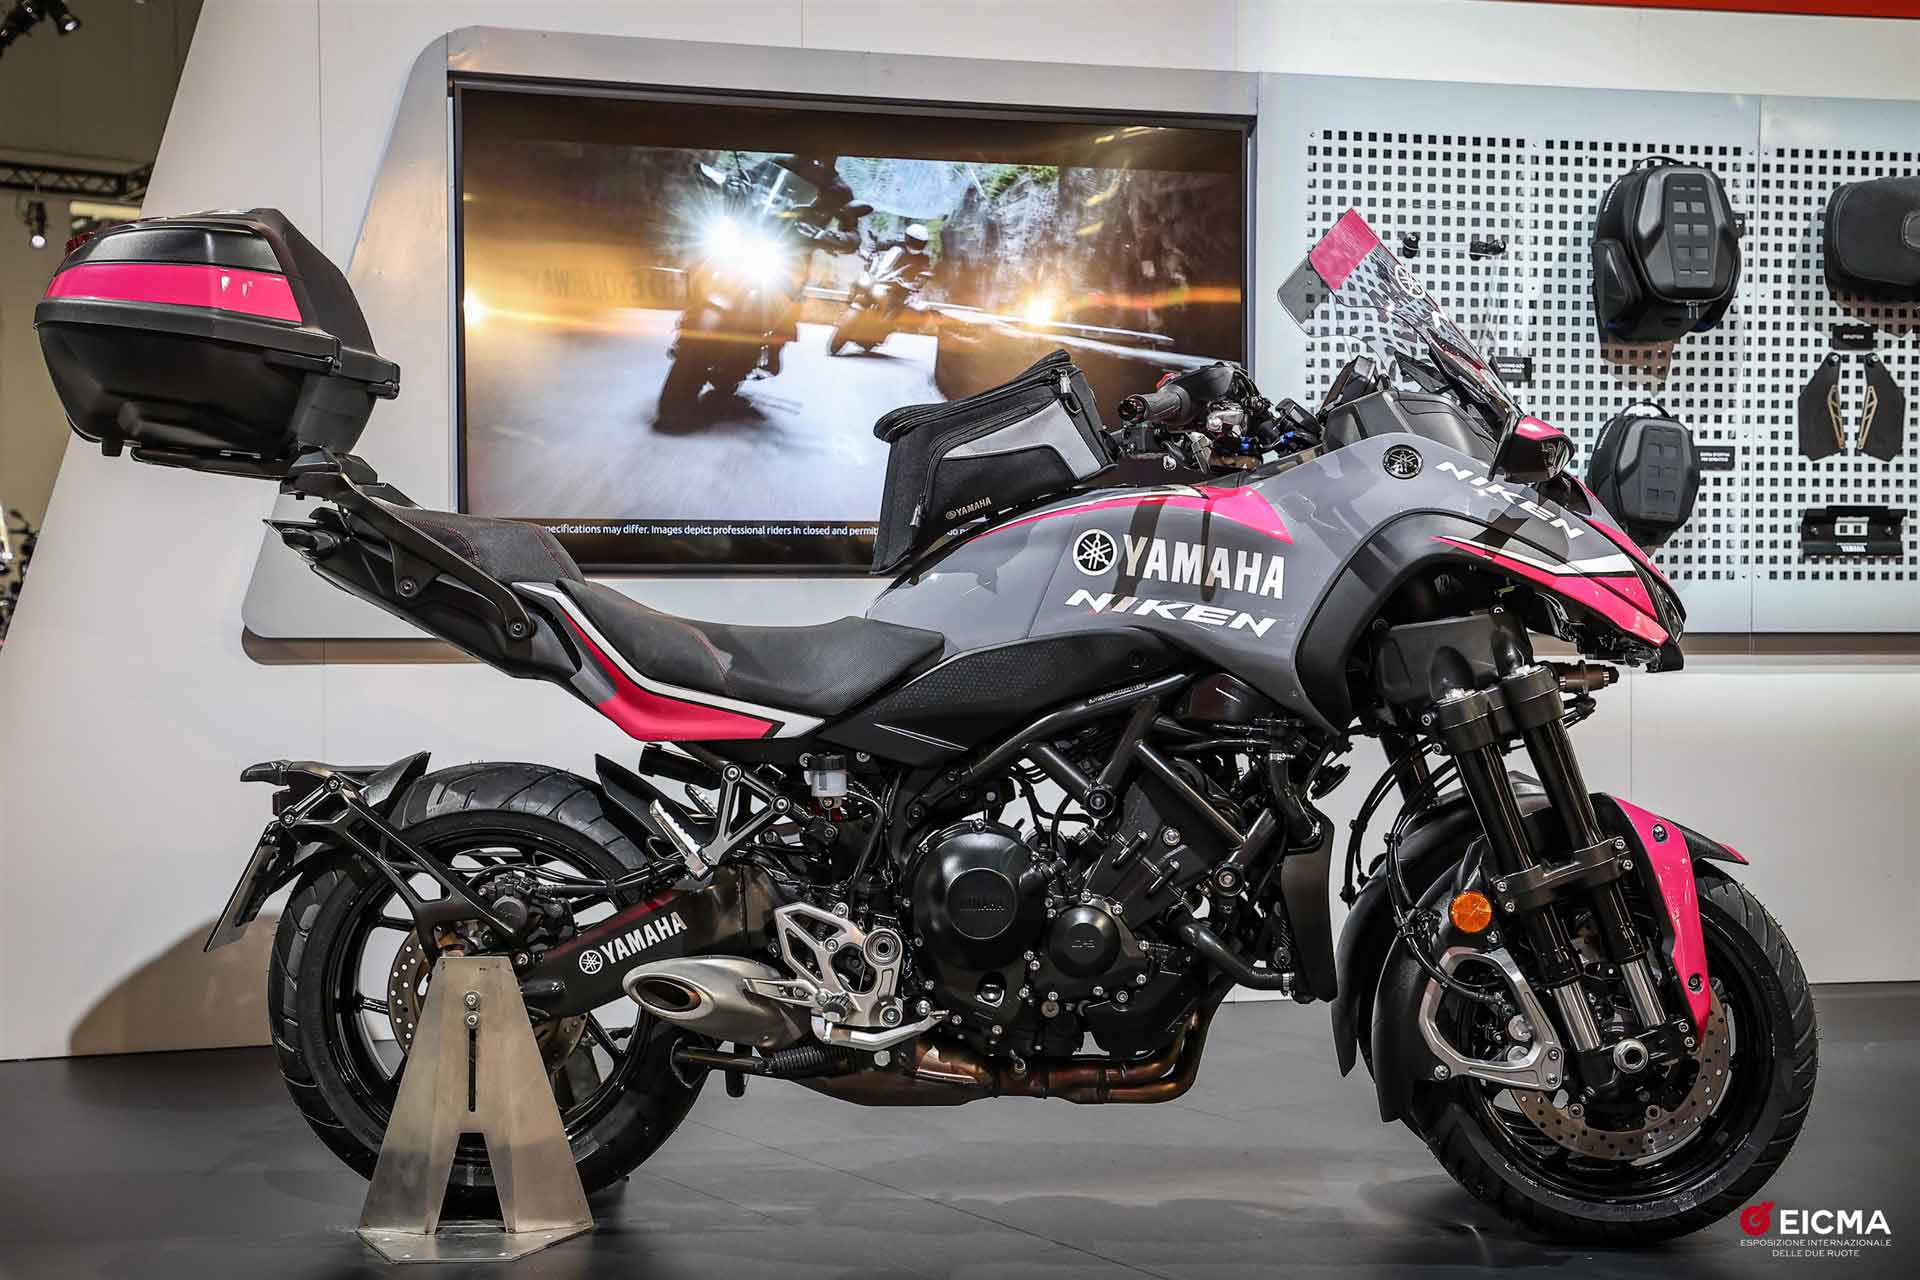 Every article about EICMA seemed to feature the Yamaha Niken. So here you go, with pink accents